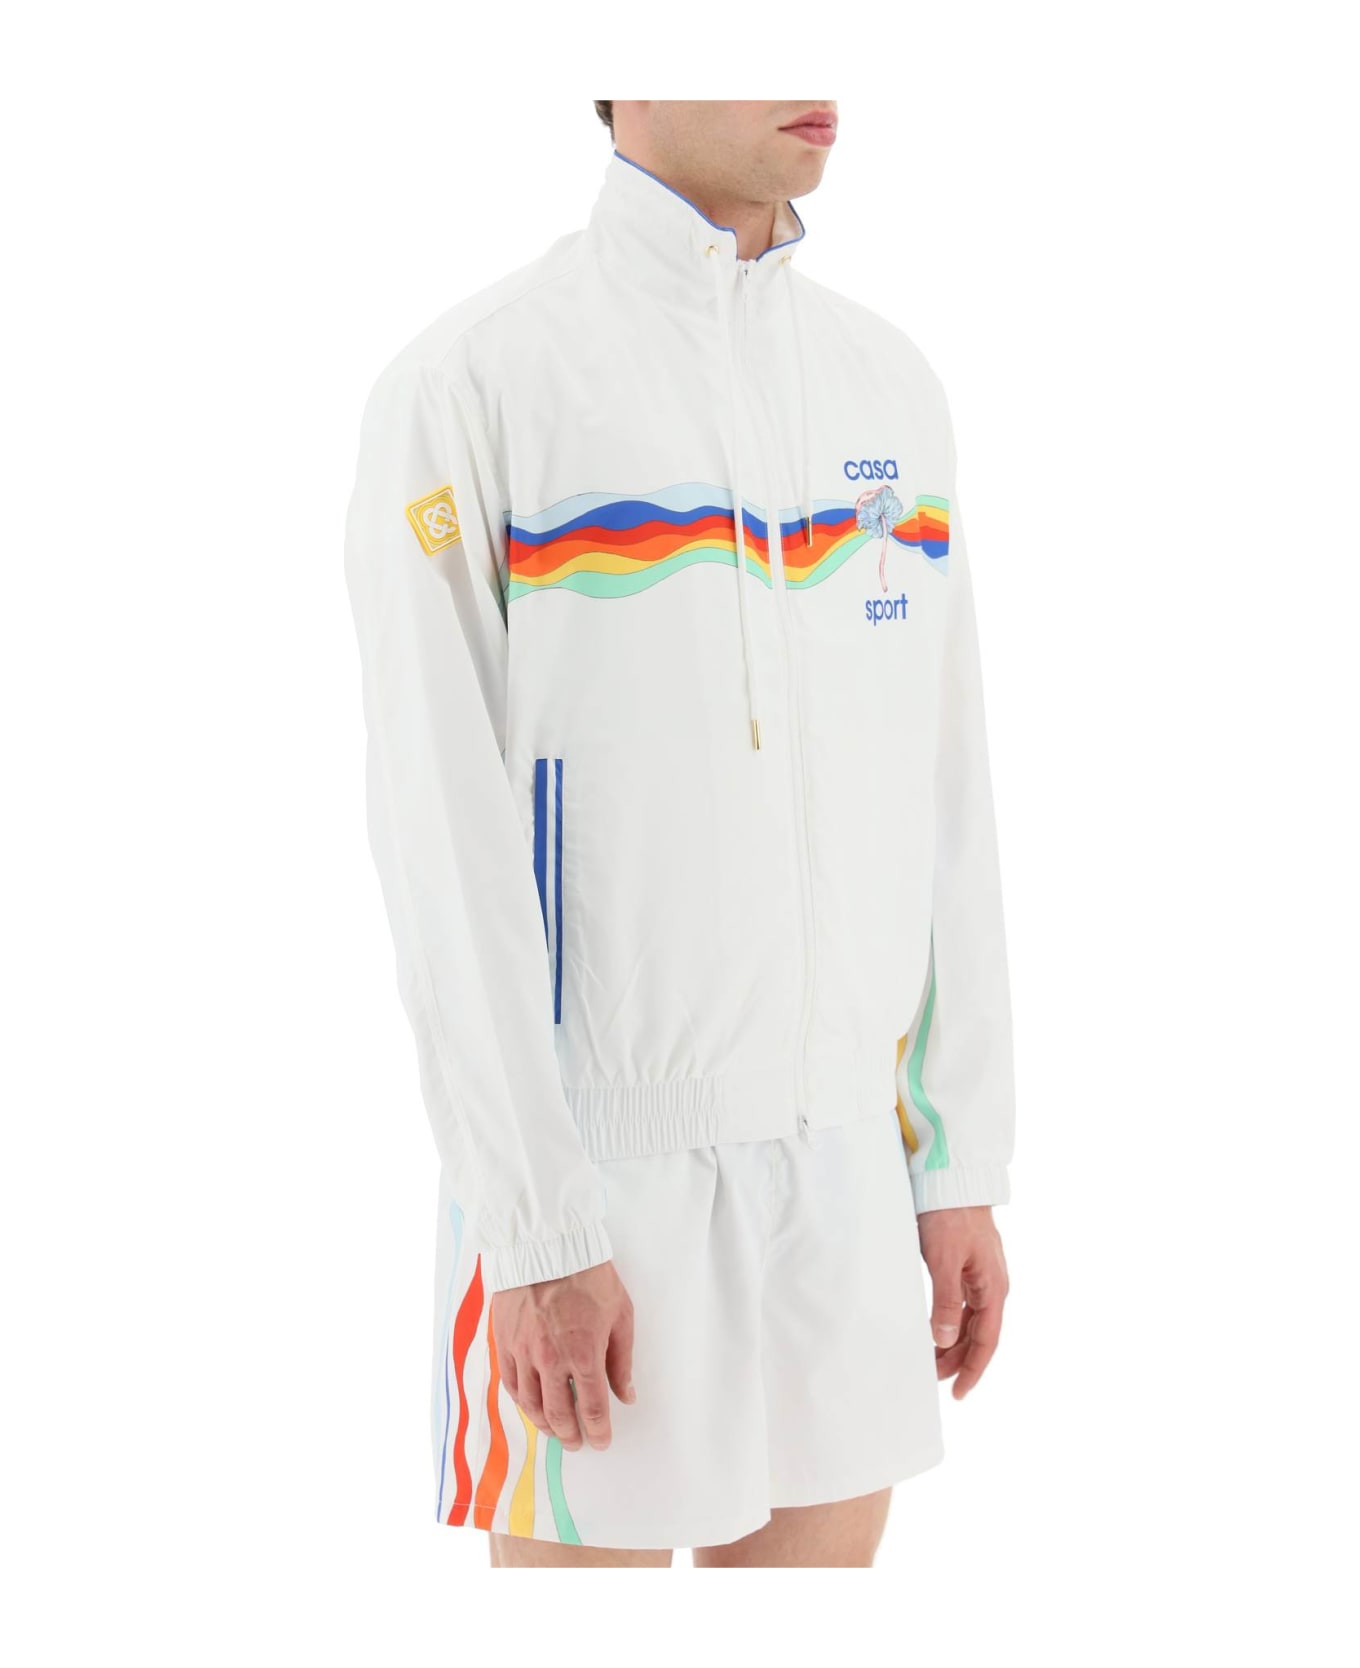 Casablanca Casual Jacket In White Polyester - MIND VIBRATIONS (White)